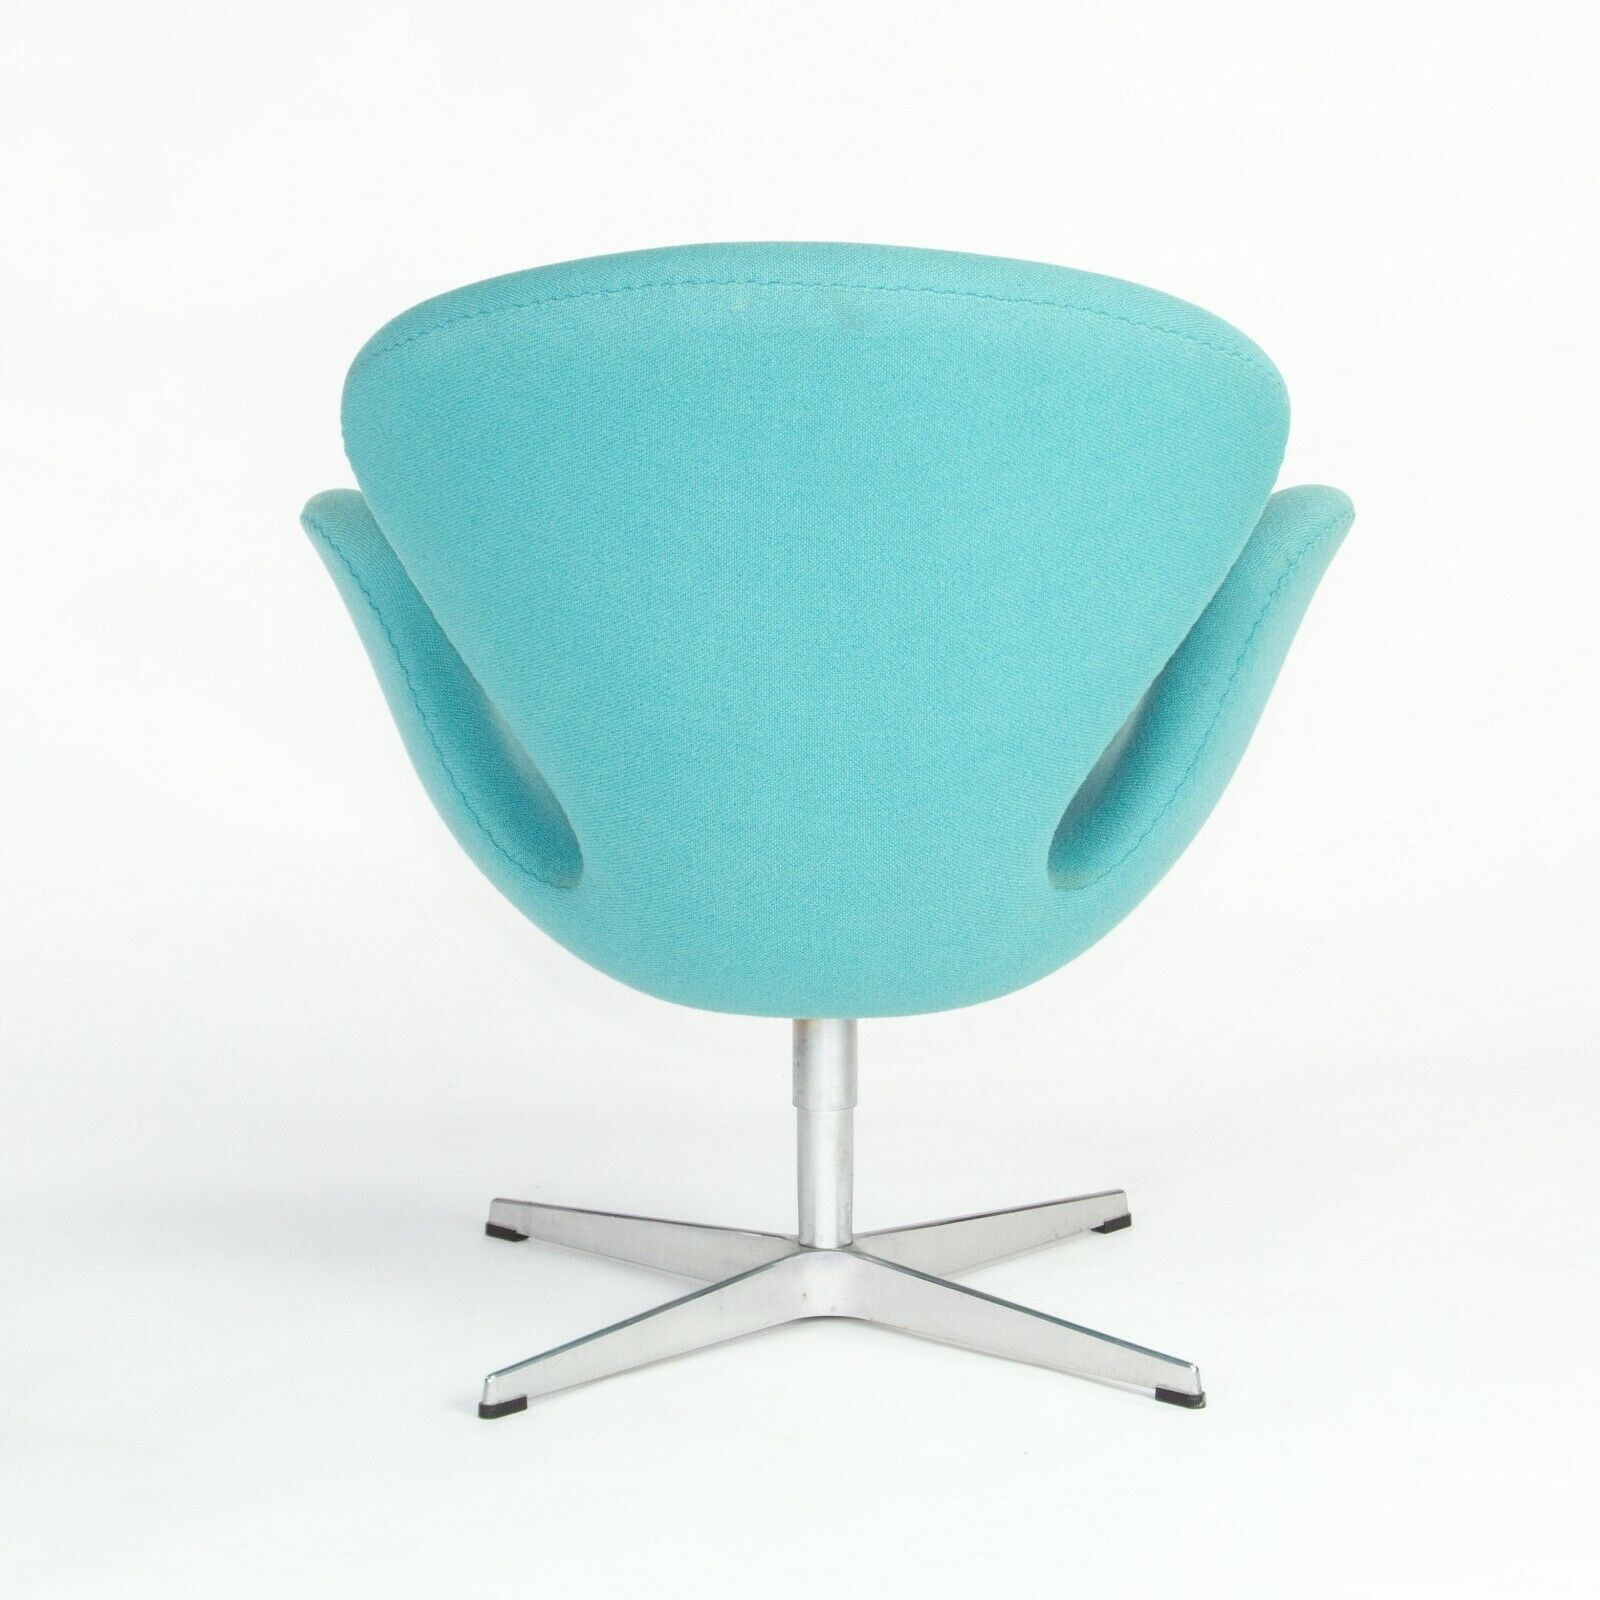 2004 Arne Jacobsen Swan Chairs by Fritz Hansen in Turquoise Hopsack Fabric